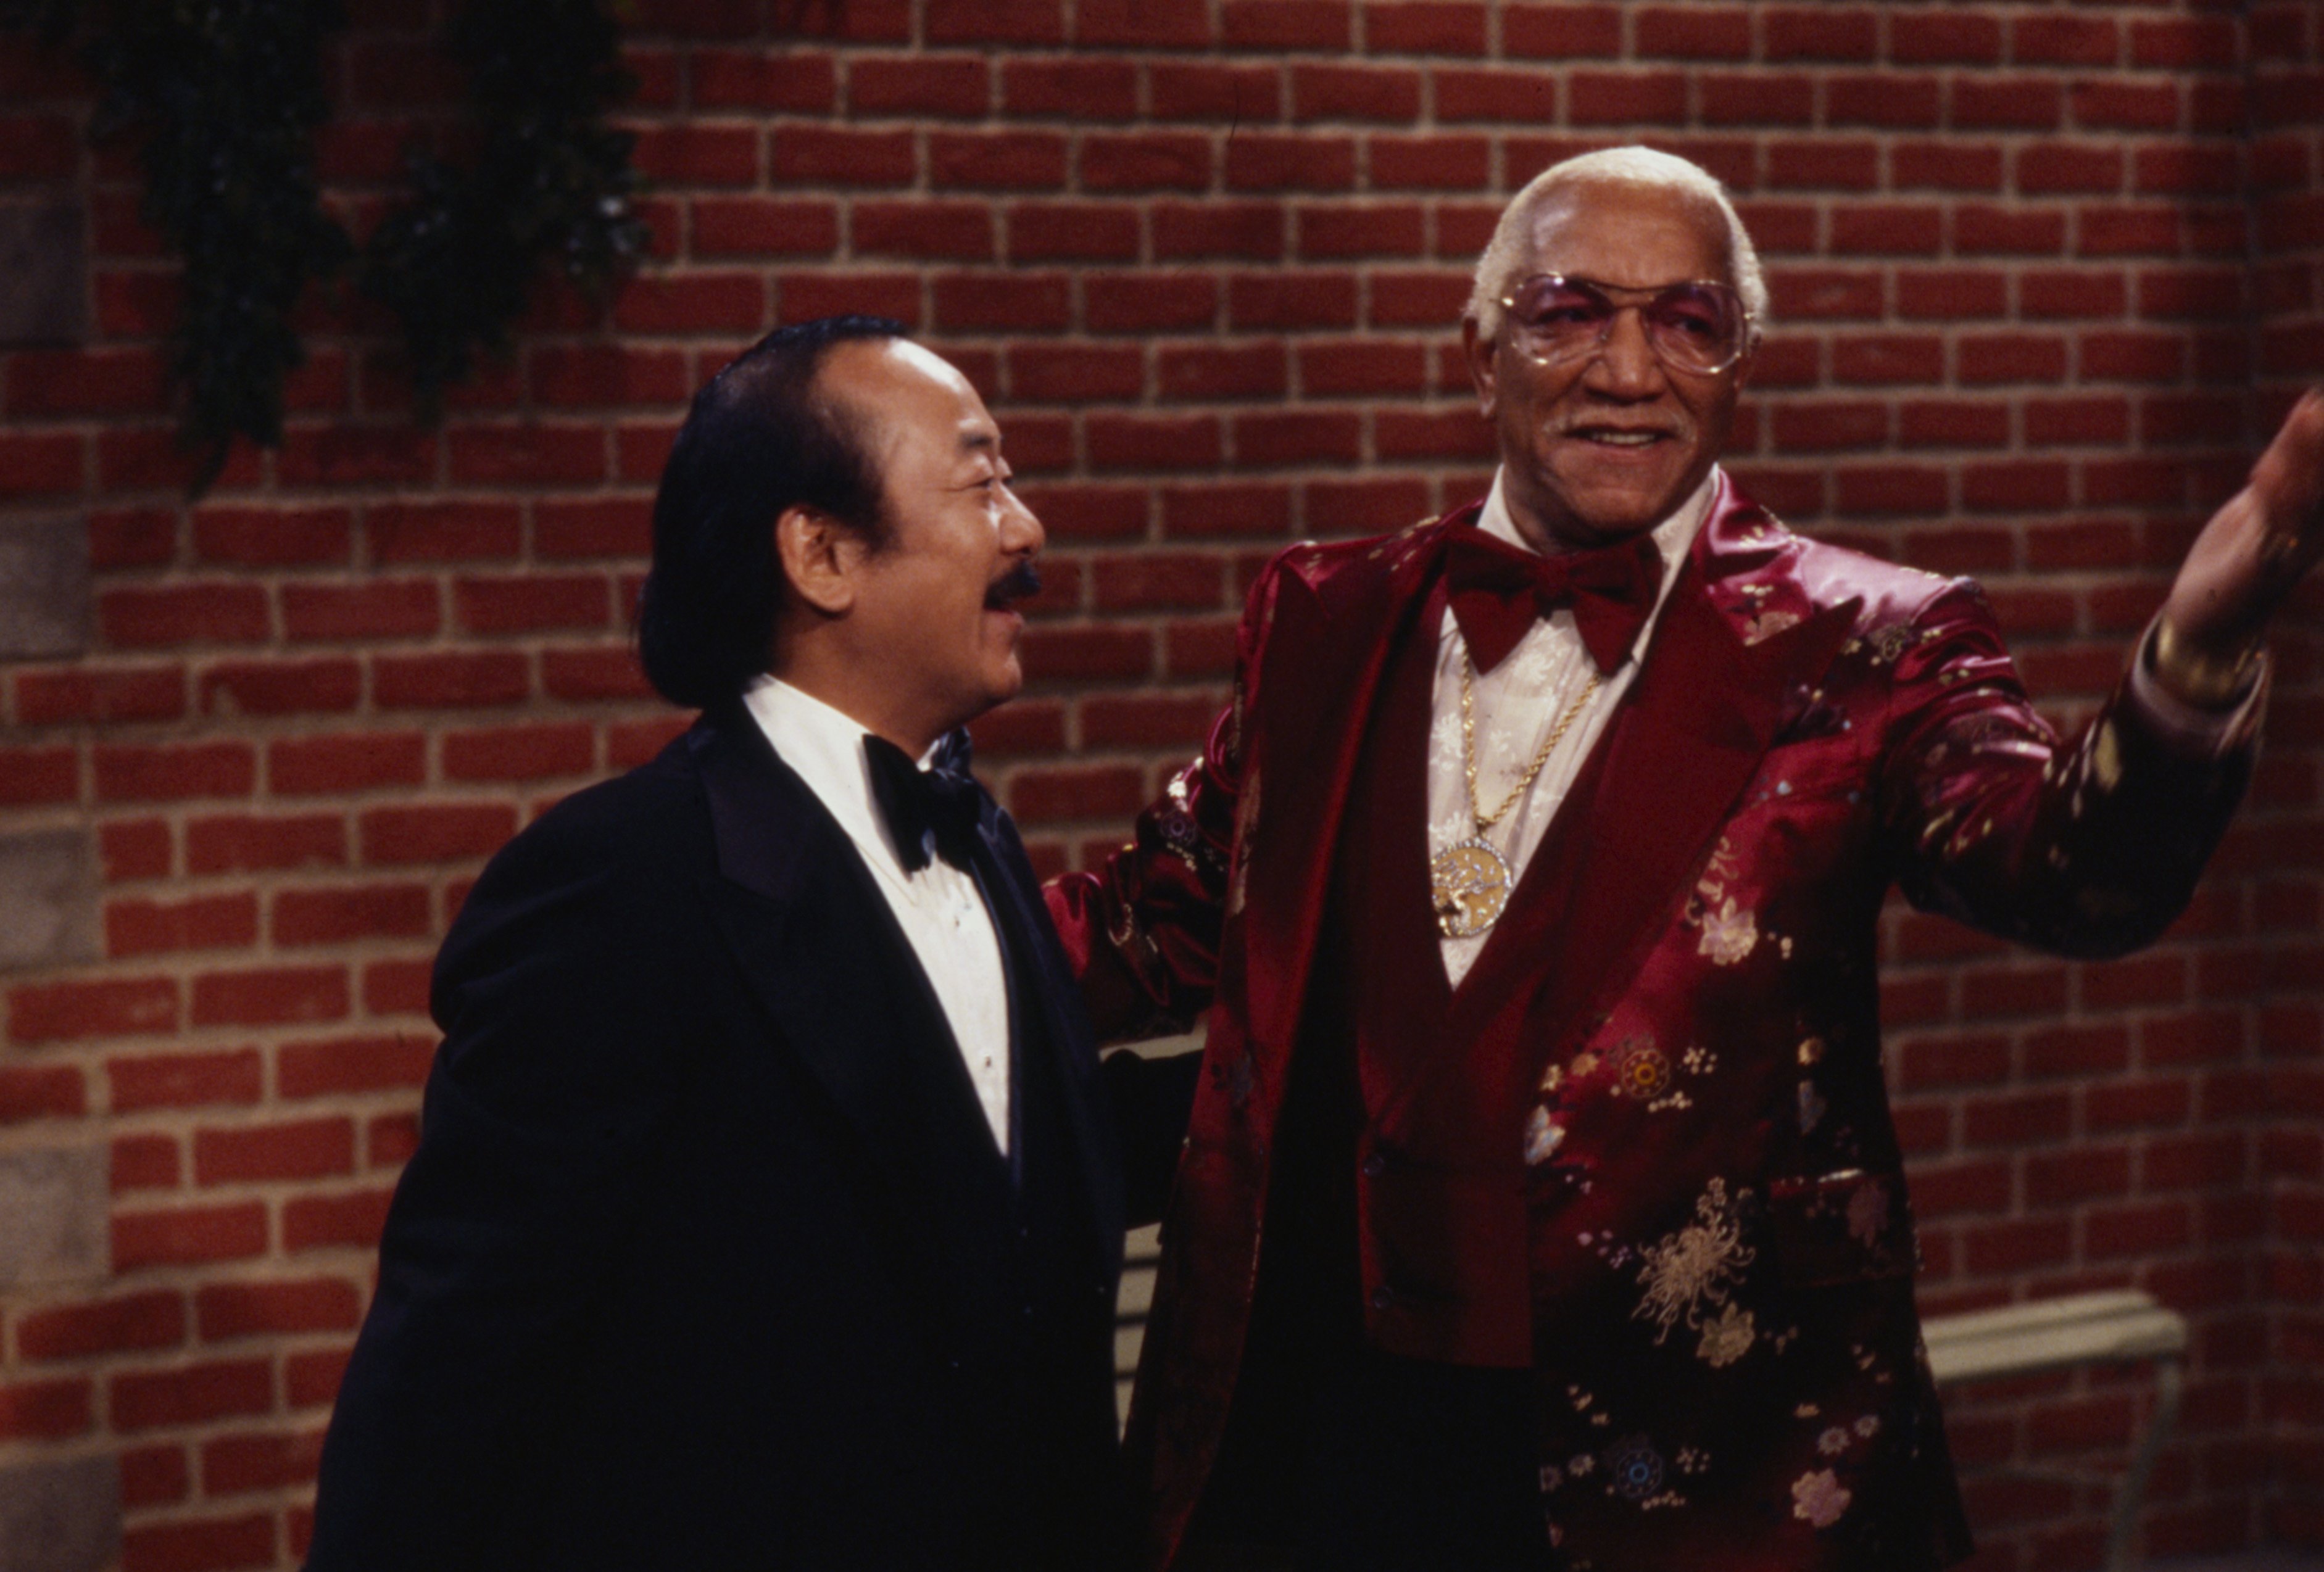 Pat Morita and fellow comedian Redd Foxx appearing in a sketch on the ABC TV series "The Redd Foxx Comedy Hour," in 1977. | Source: Getty Images